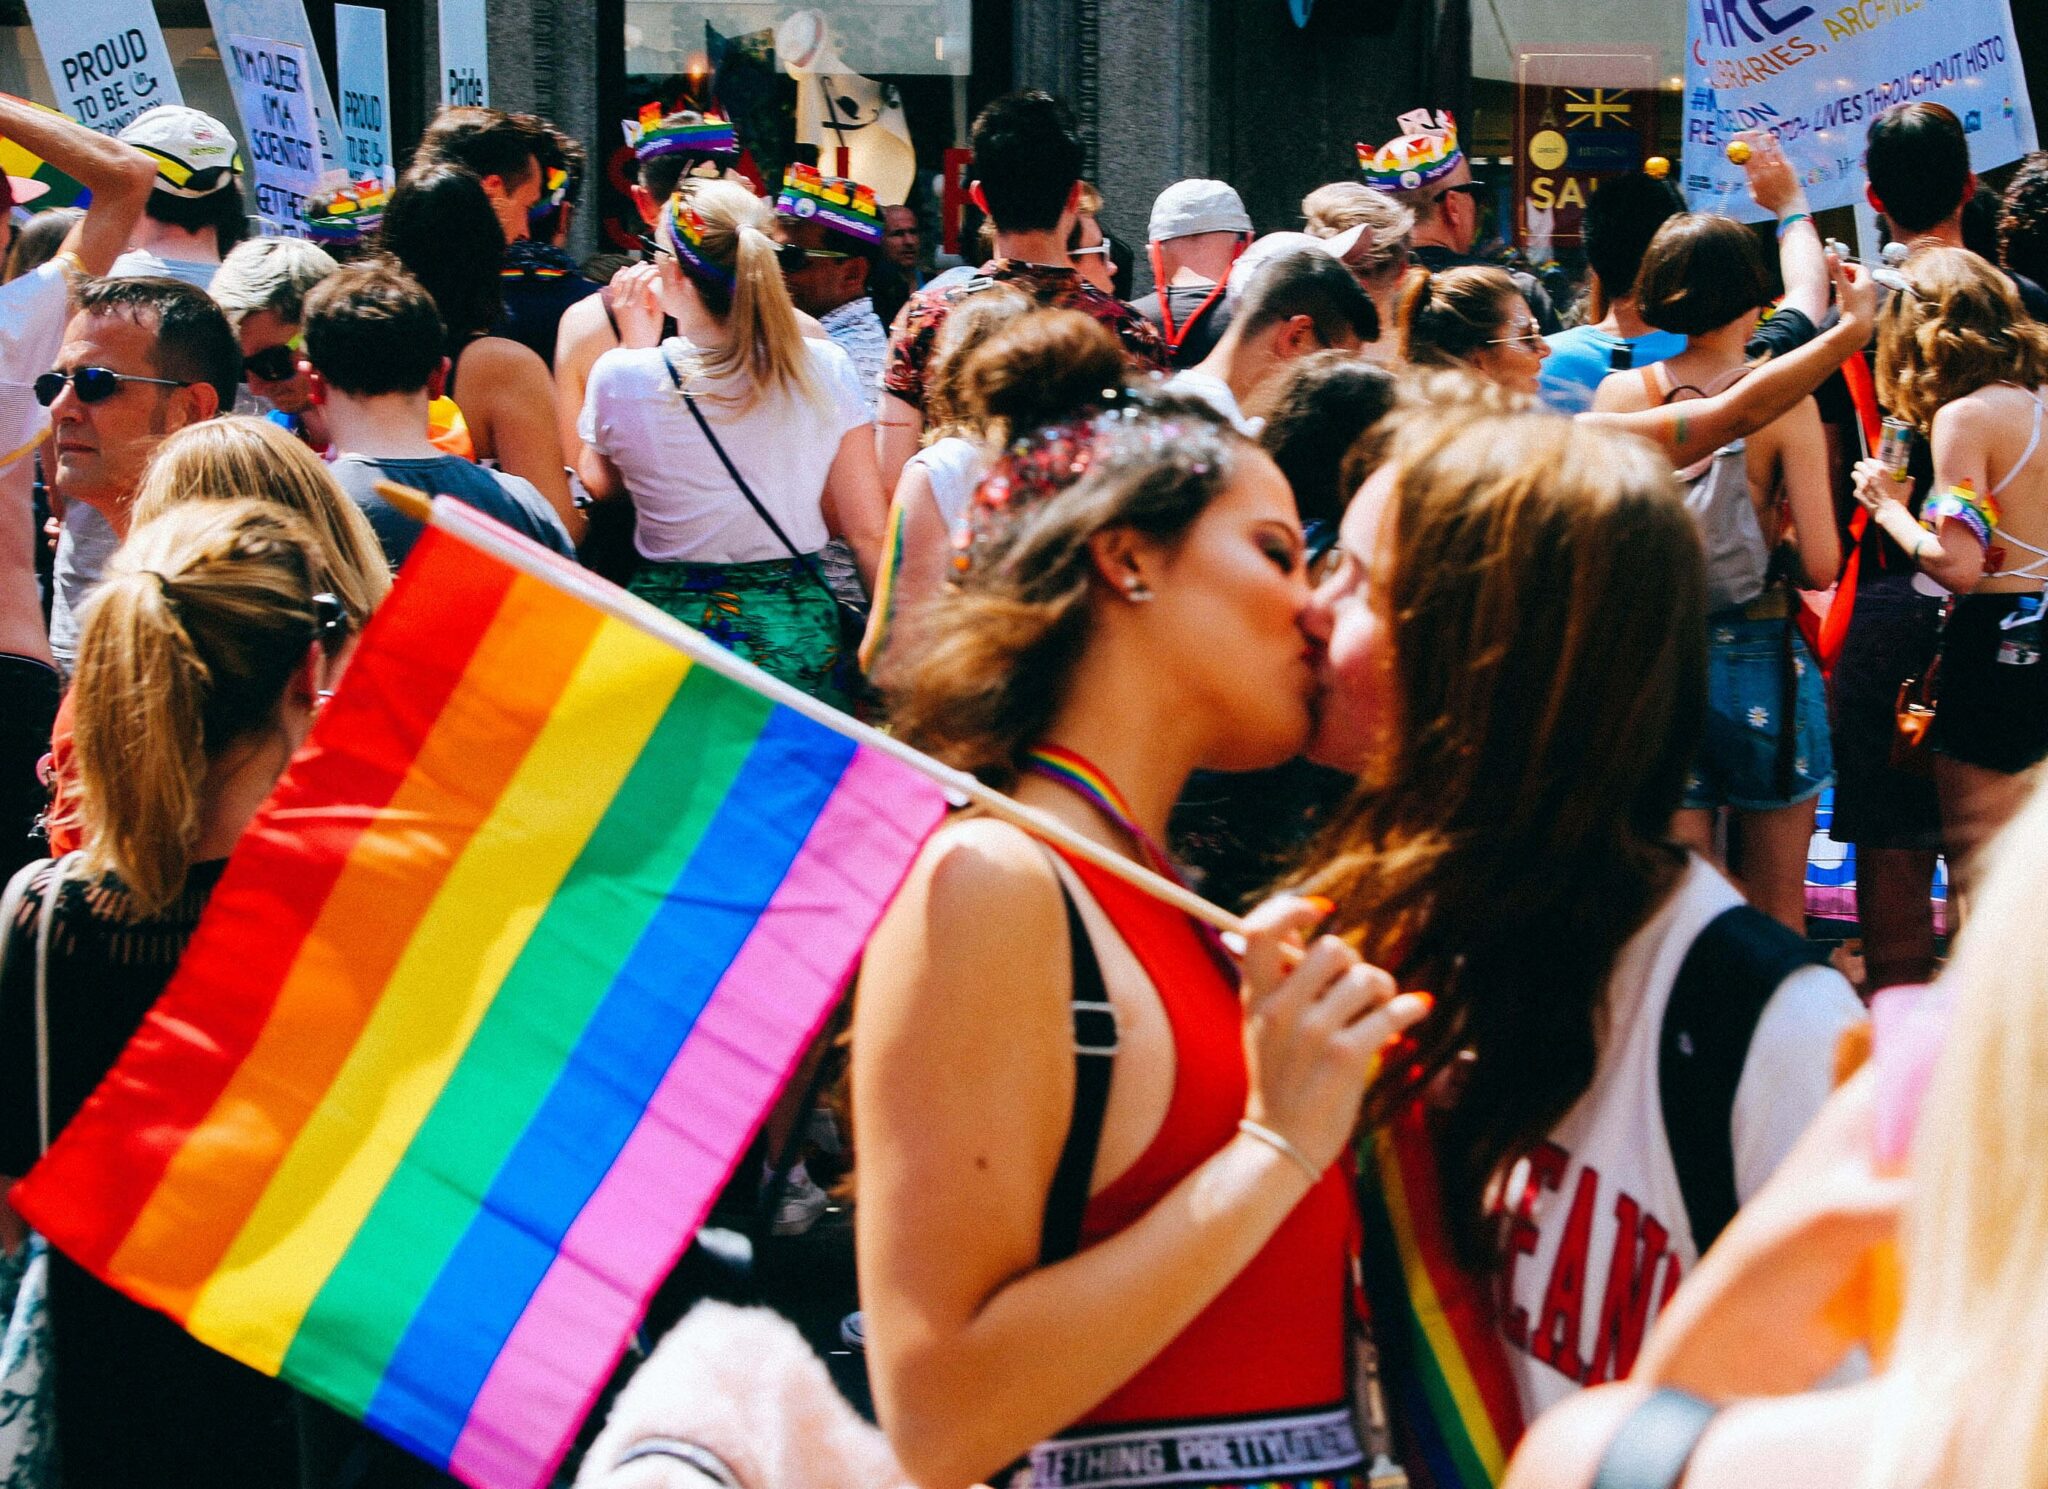 Two women at a Pride parade kissing and holding a flag.